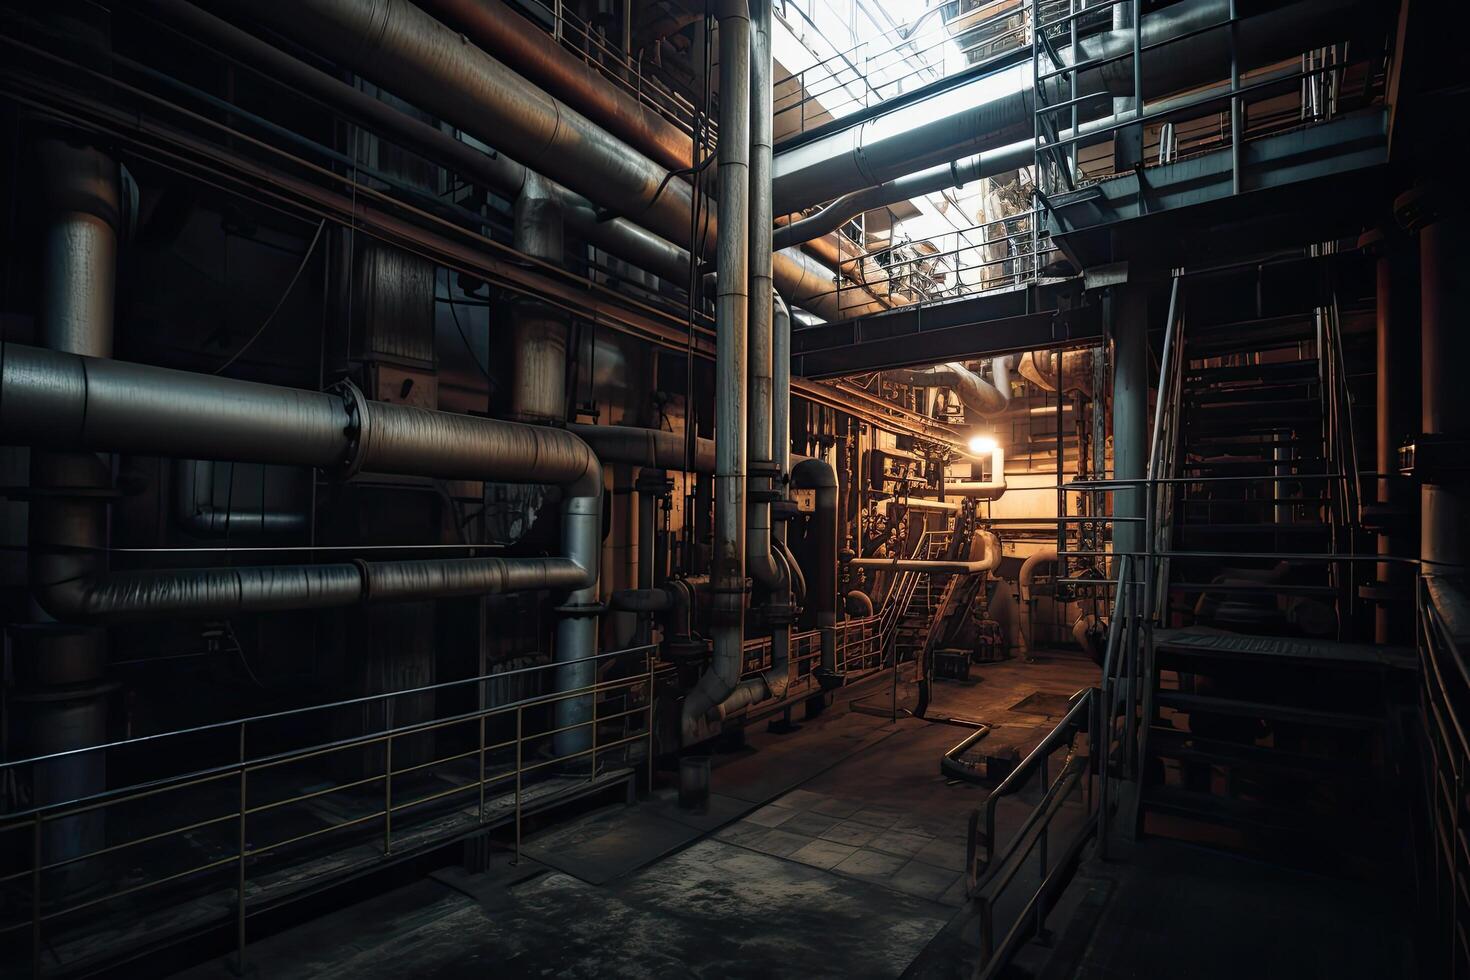 Equipment, cables and piping as found inside of a modern industrial power plant, Inside an industrial factory with metal pipelines, photo